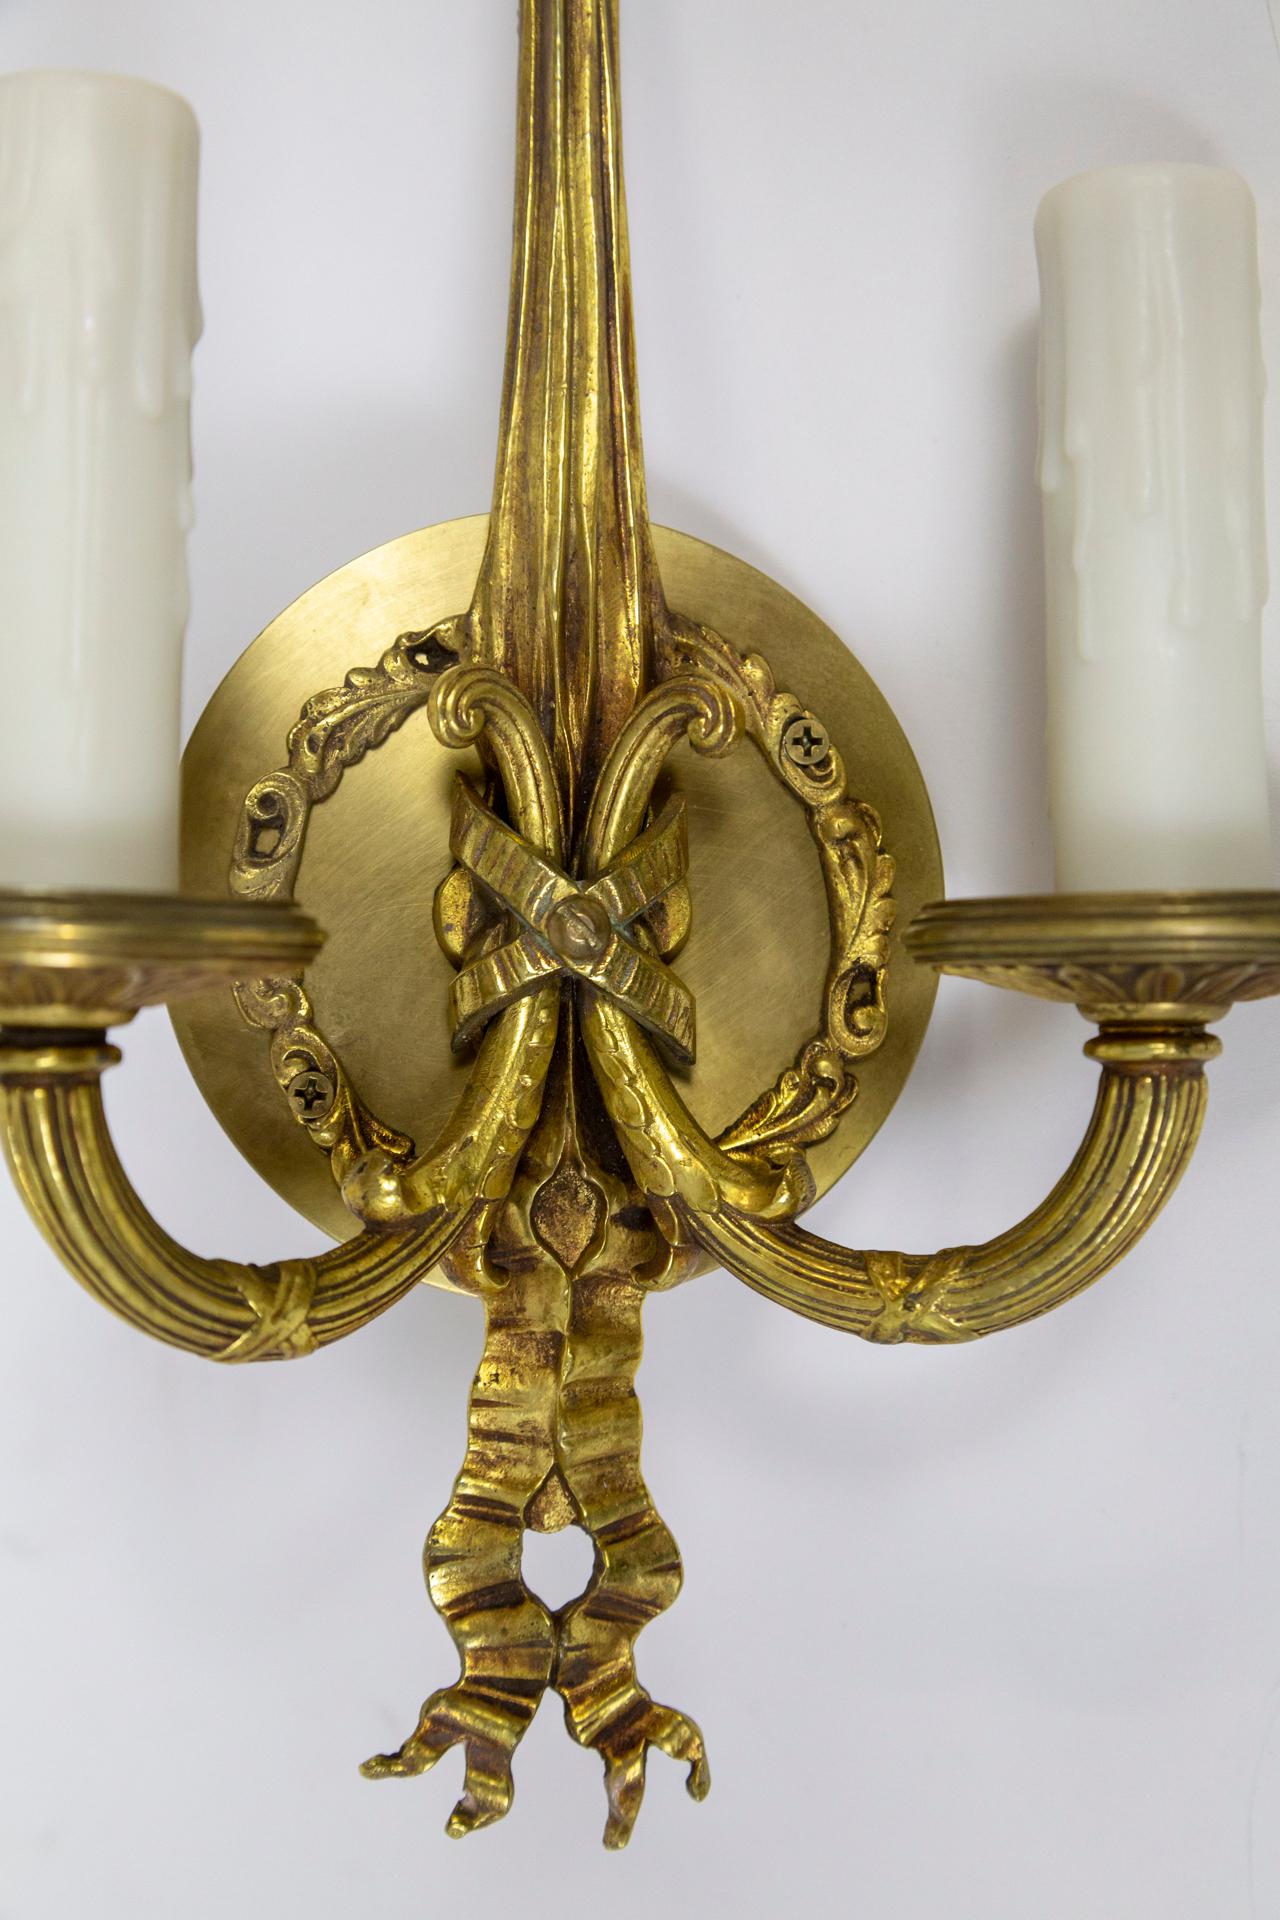 A pair of 2-arm wall sconces beautifully cast in solid brass with a reeded, pointed form, ribbons and rosettes. Made in the early 20th century in King Louis XVI style. Newly wired with faux wax (resin) candle covers. Measures: 8